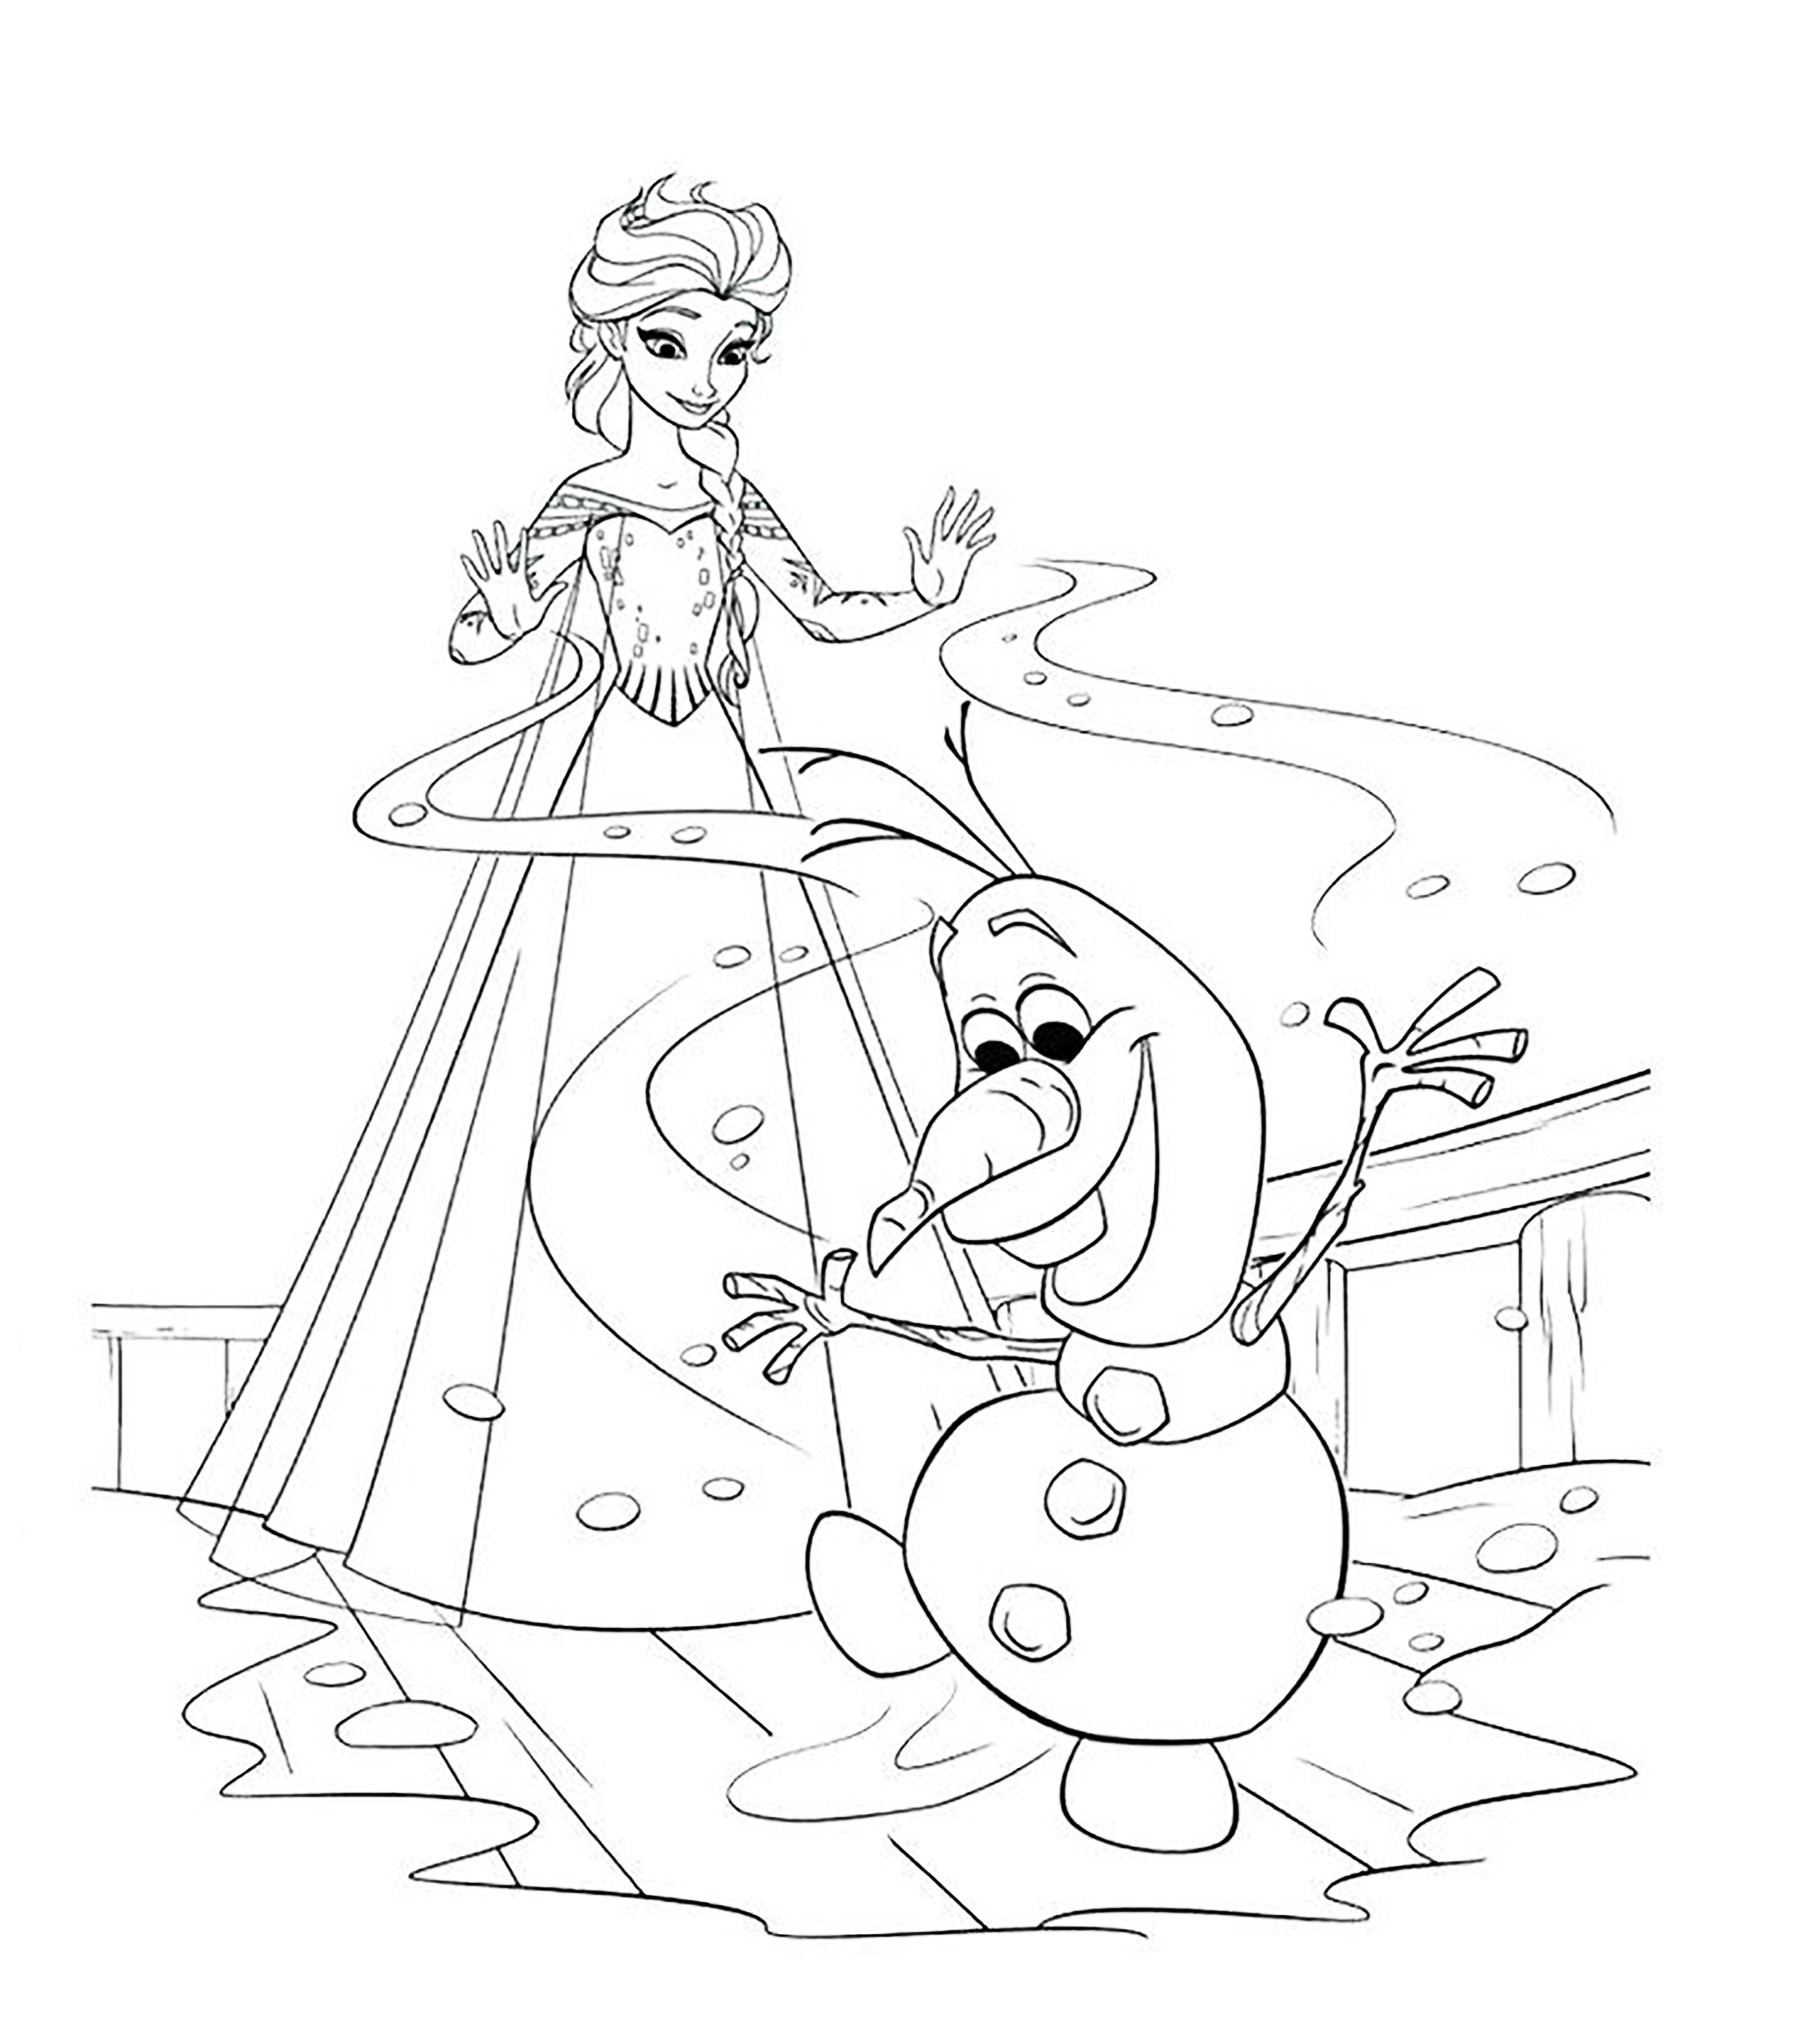 Coloring Pages For Kids Frozen
 Frozen free to color for children Frozen Kids Coloring Pages